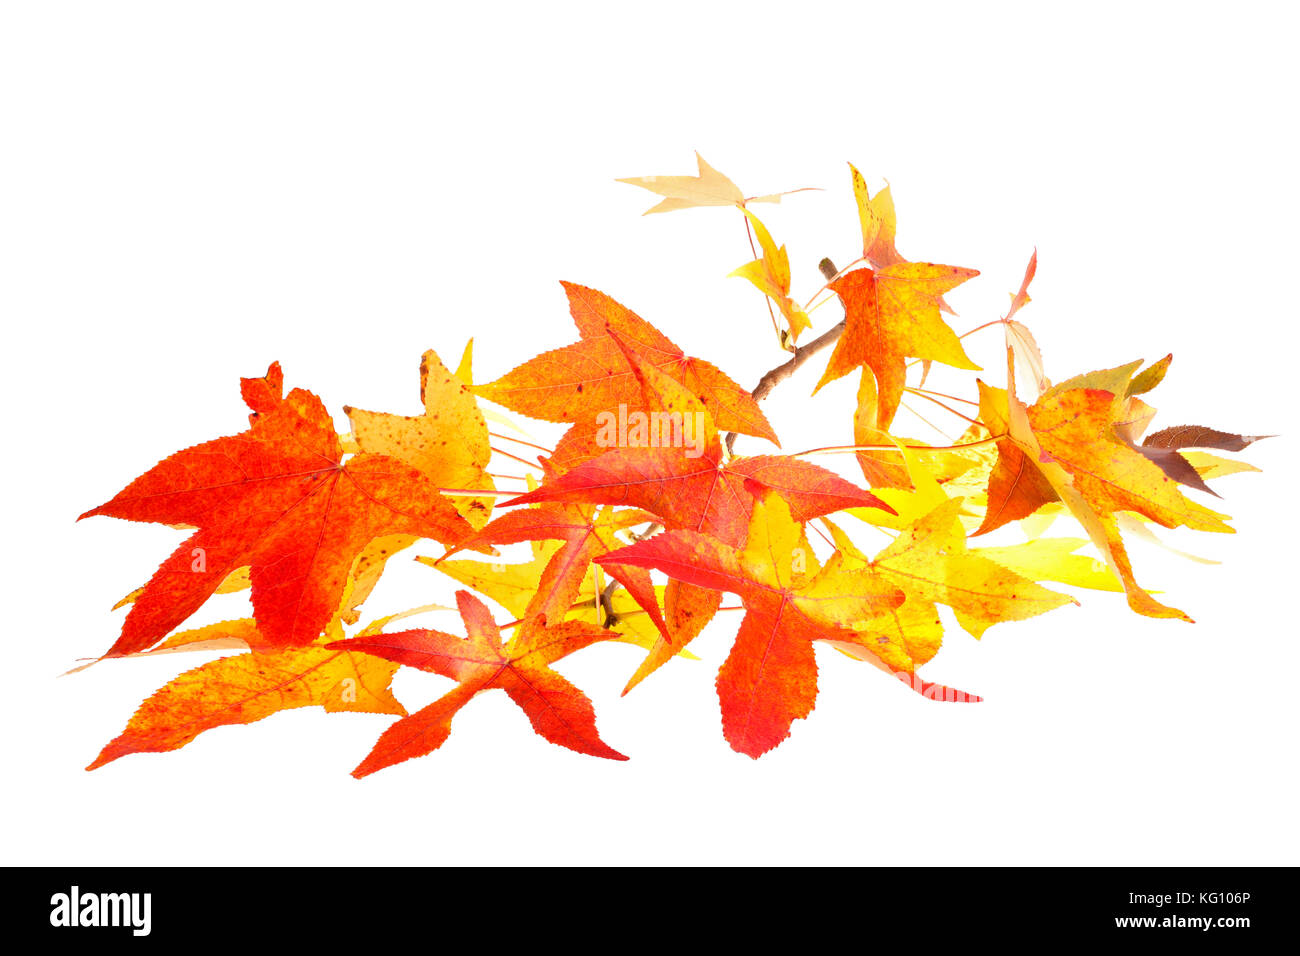 Red, yellow and orange fall leaves of sweet gum (Liquidambar styraciflua) on a single branch isolated against a white background Stock Photo